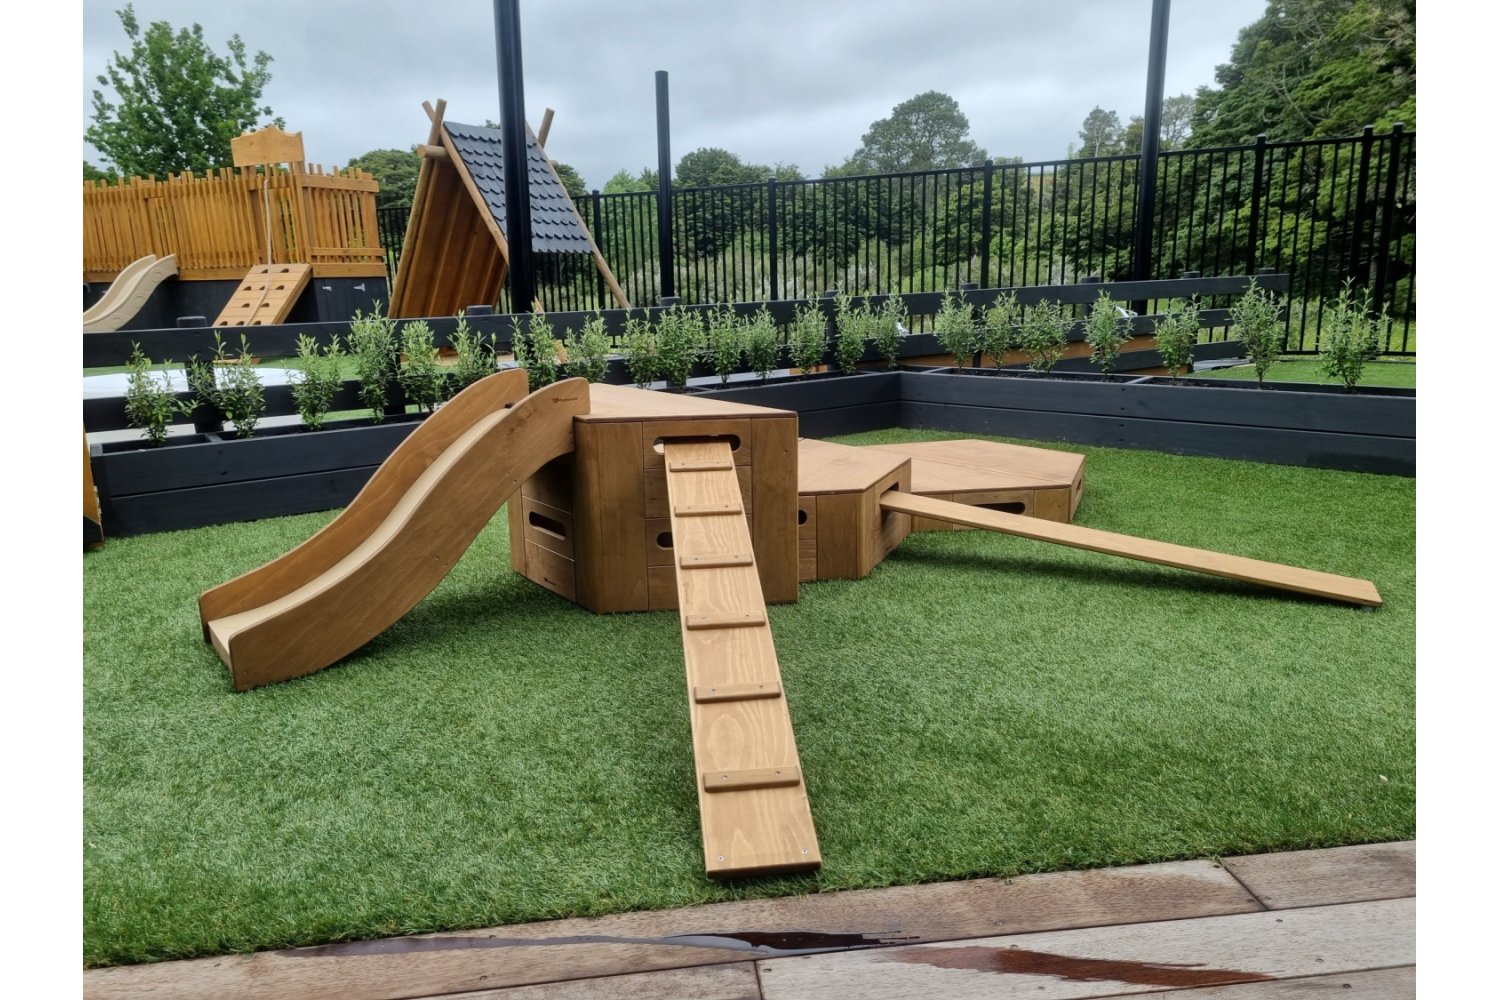 Movable play equipment with slide childcare 